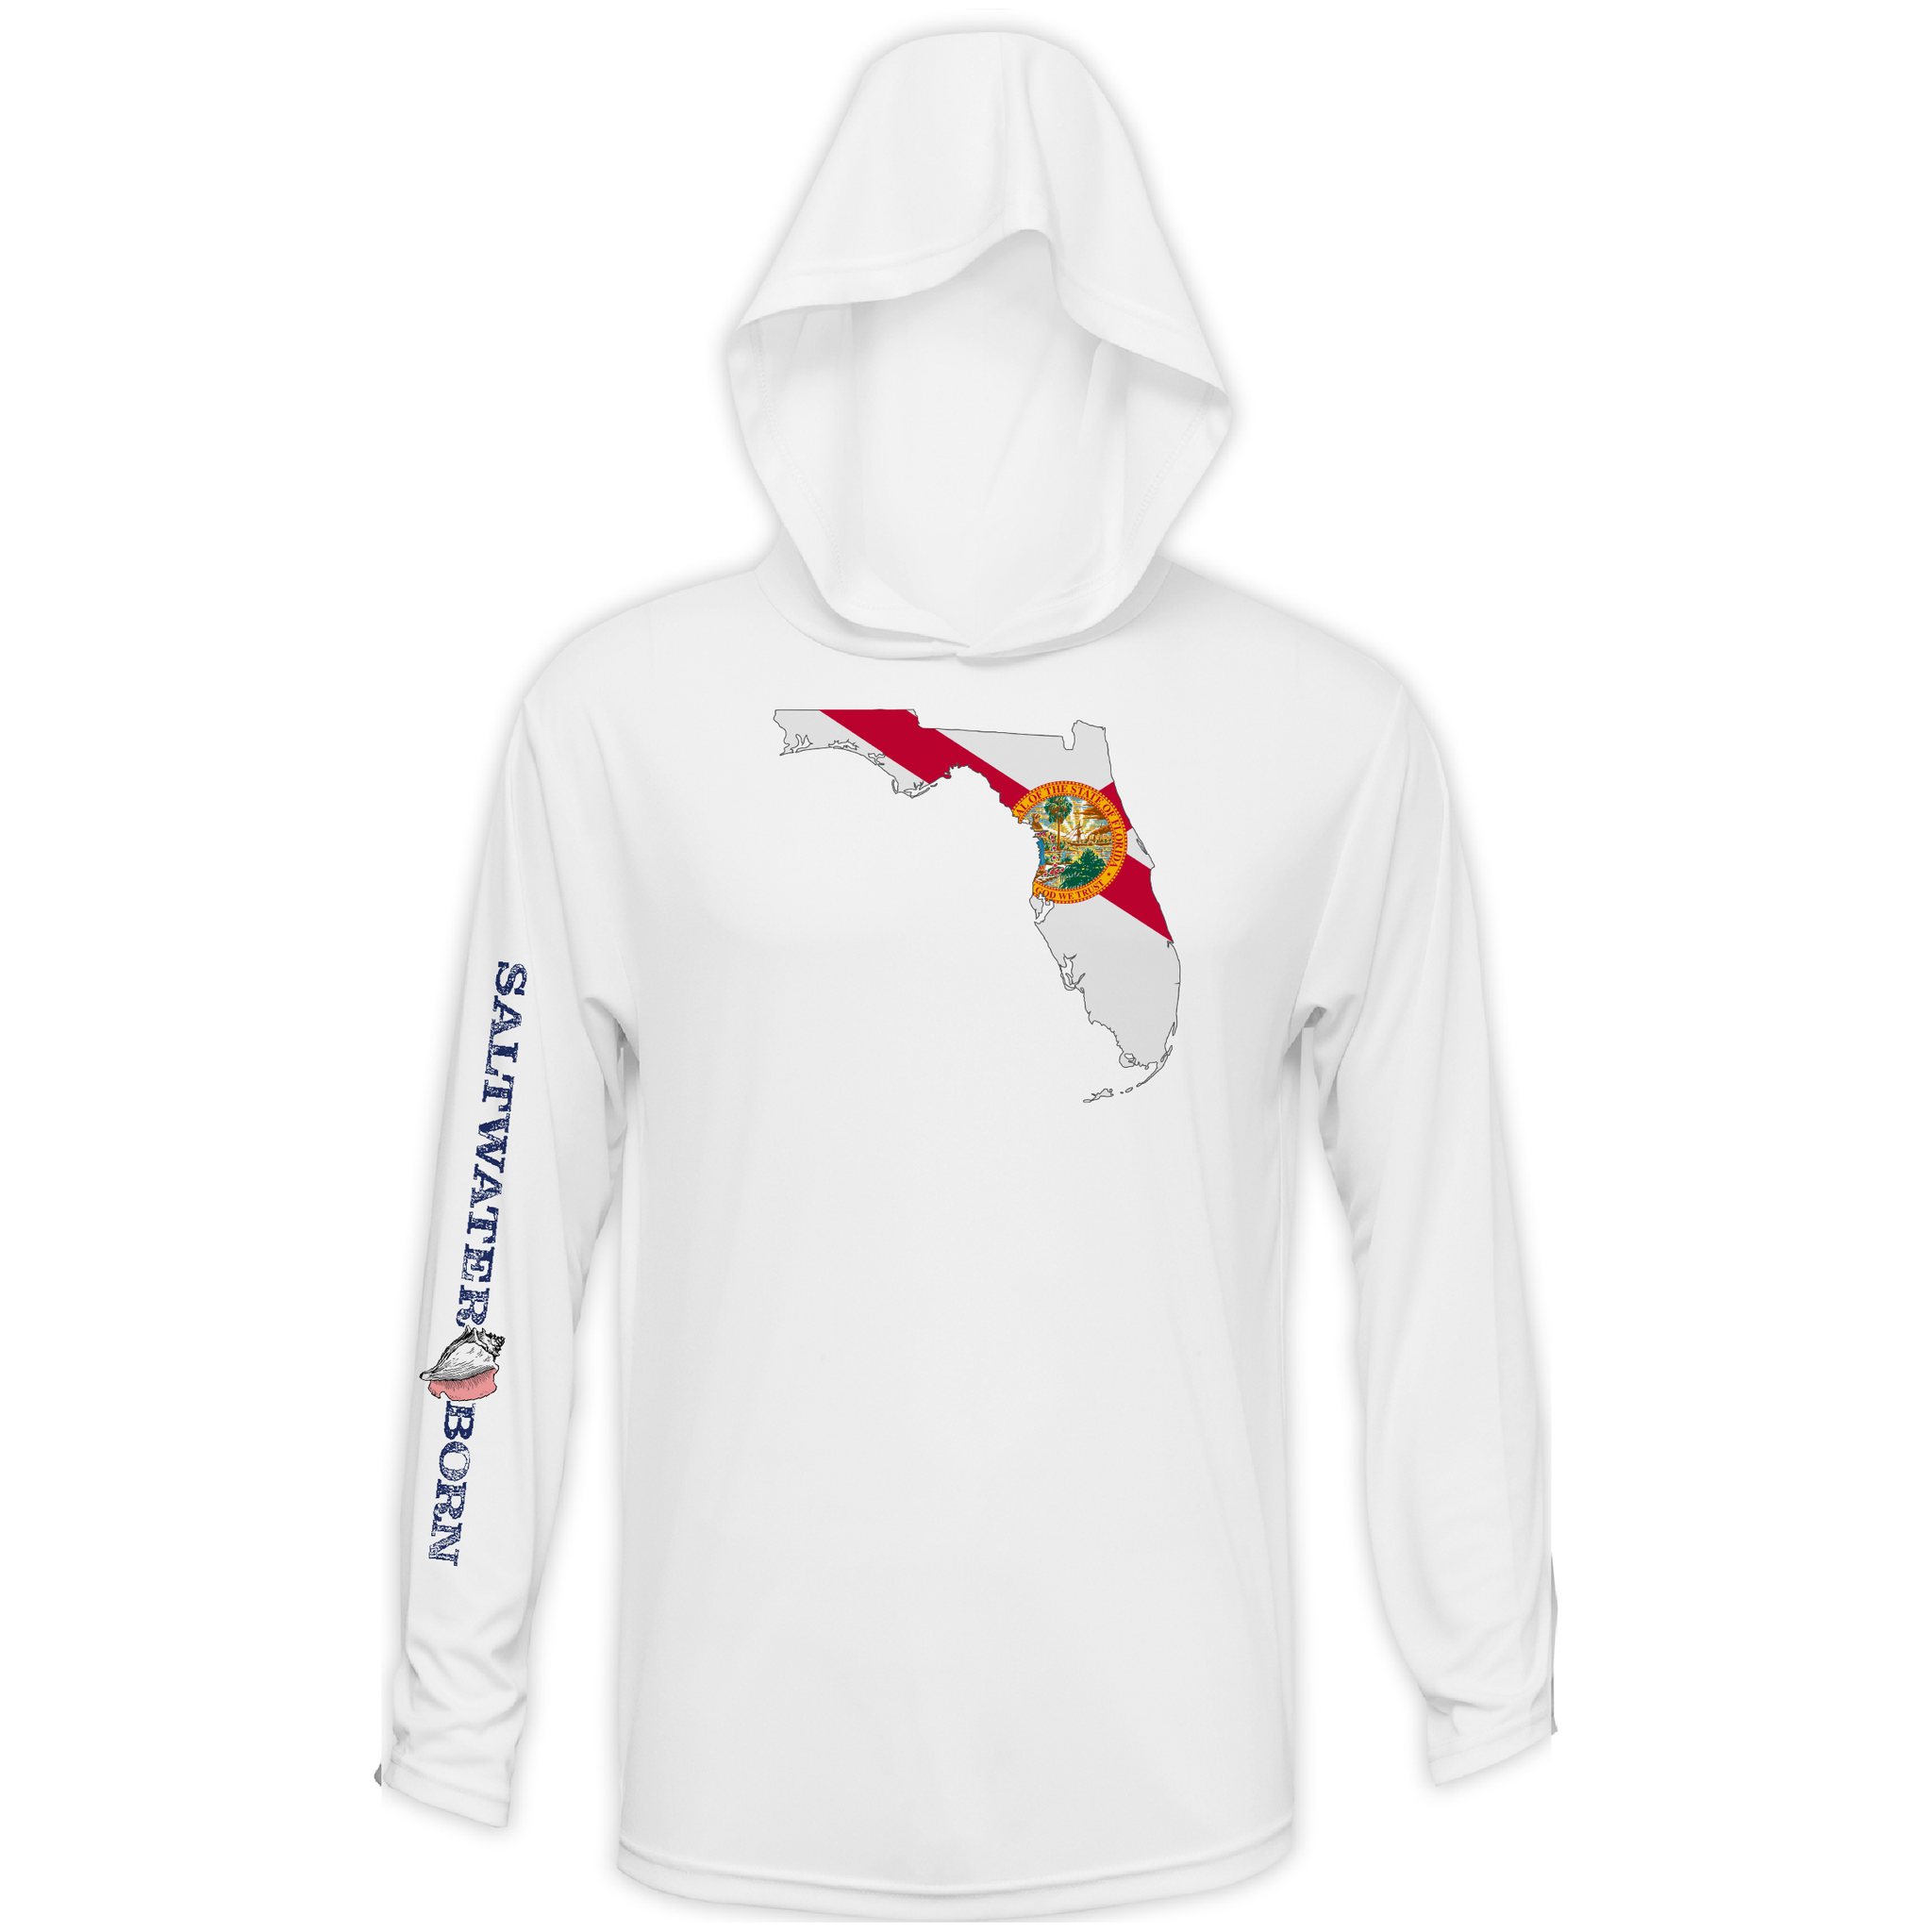 State of Florida Boys and Girls Long Sleeve UPF 50+ Dry-Fit Hoody